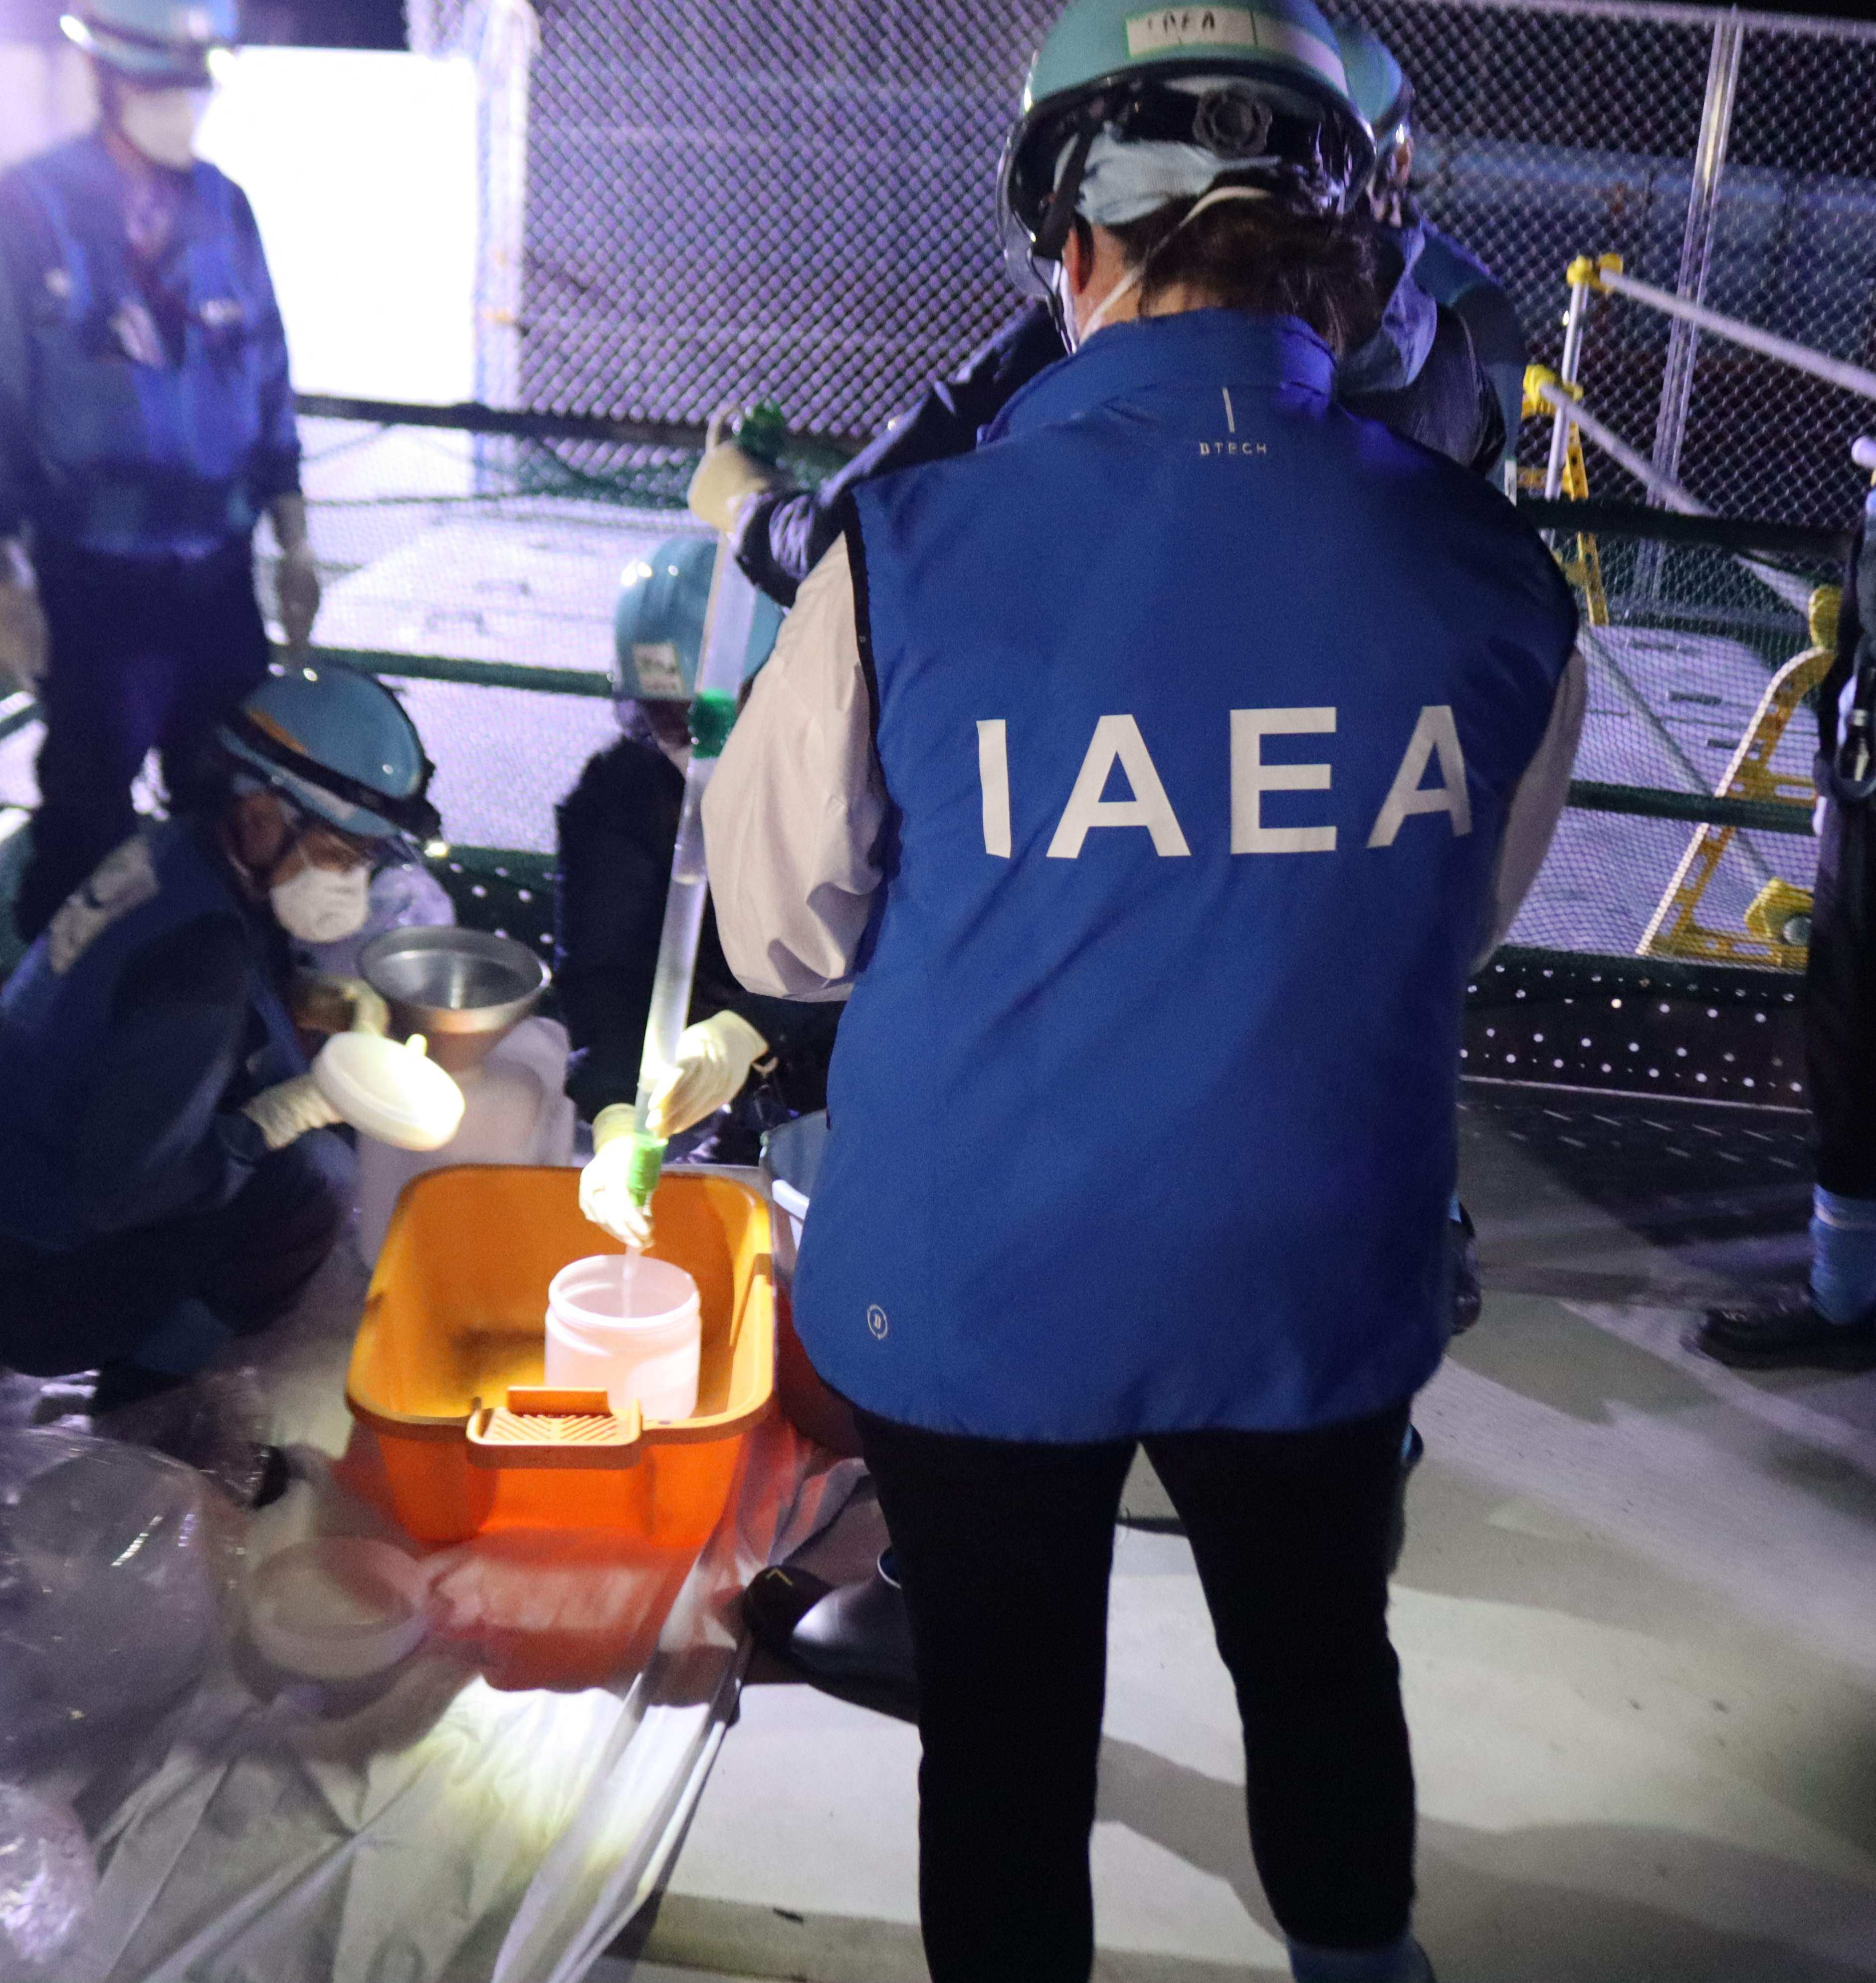 A photo released by TEPCO on August 23 shows International Atomic Energy Agency staff witnessing sampling for the initial release of treated water at the Fukushima Daiichi nuclear power plant in Okuma, Fukushima prefecture. Photo: Handout